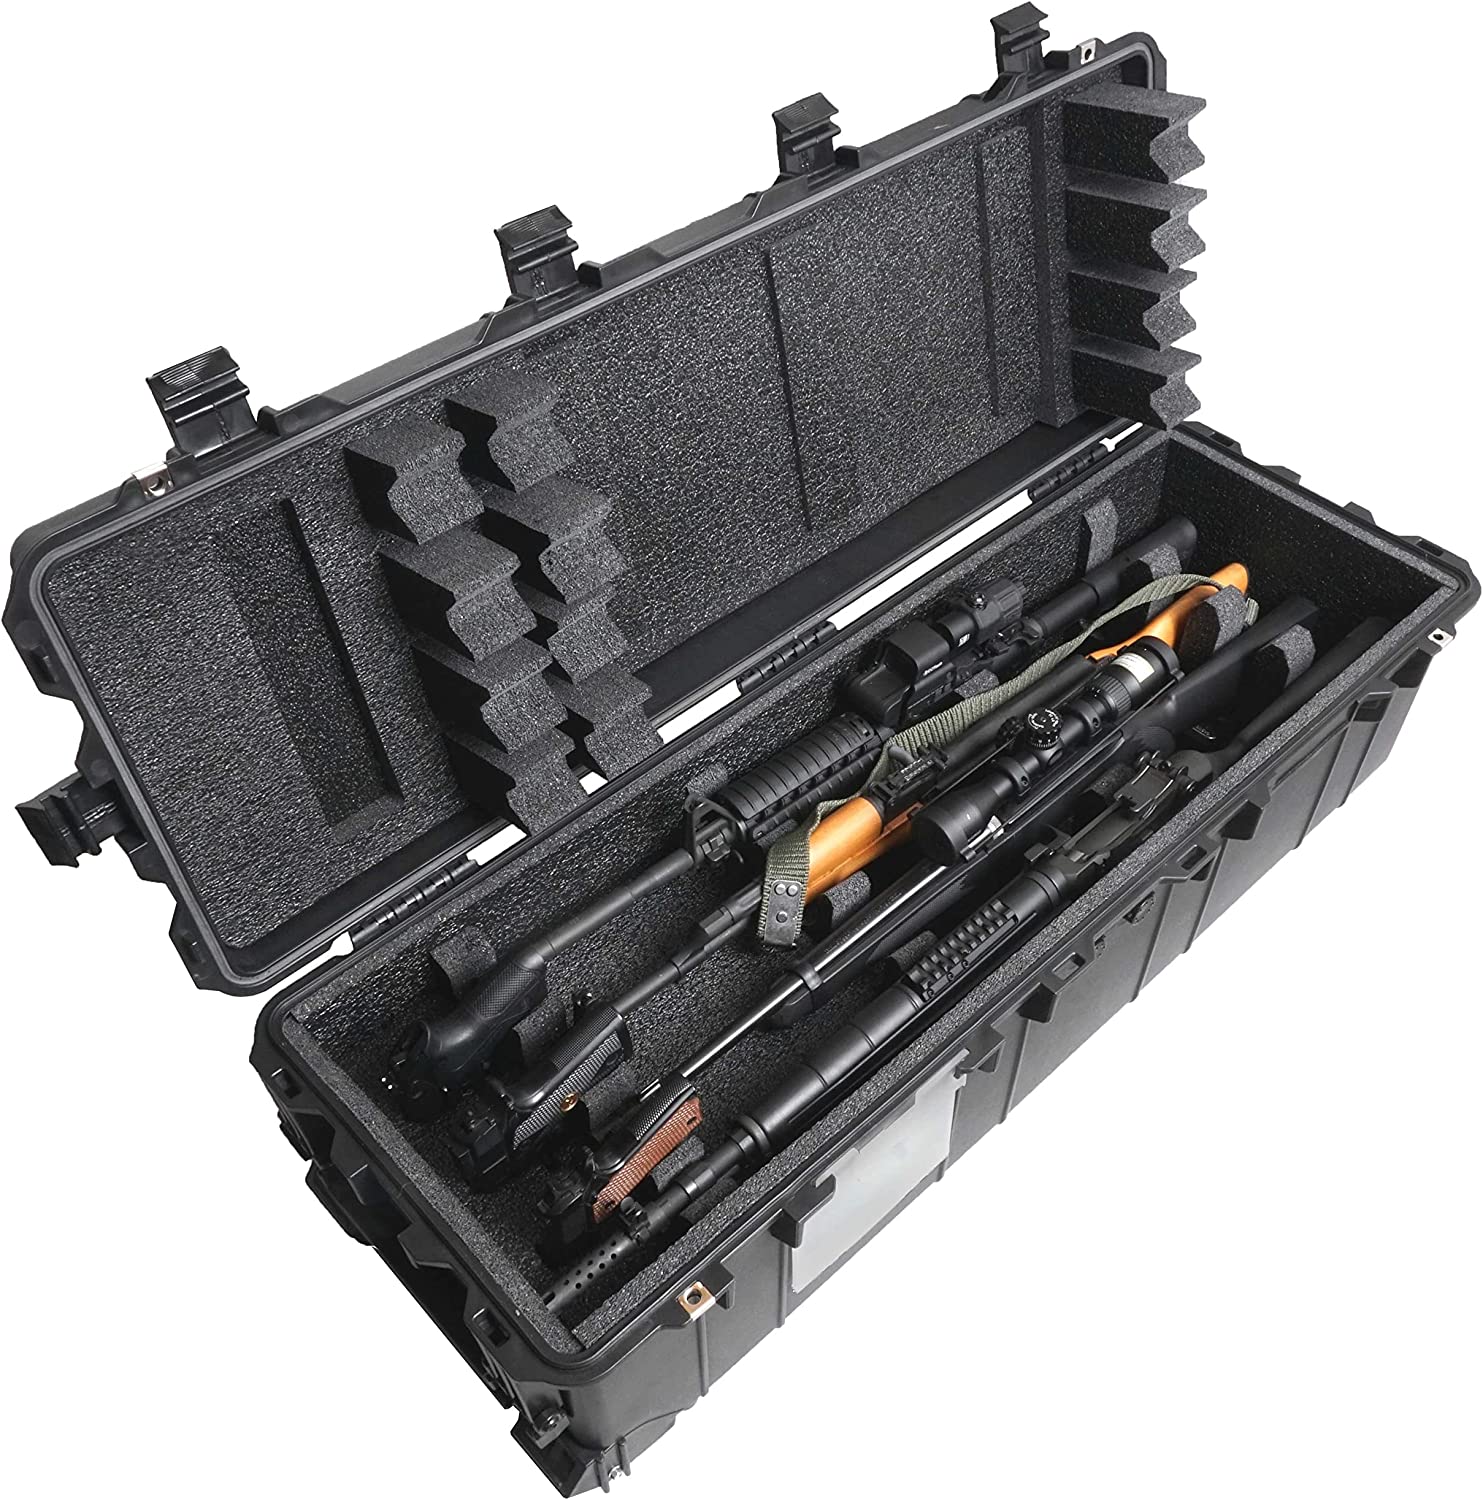 Case Club 4 Rifle (or Shotgun) Waterproof Shipping Case fits Multiple Guns & 3 Pistols Along with Included Silica Gel Canister to Prevent Gun Rust